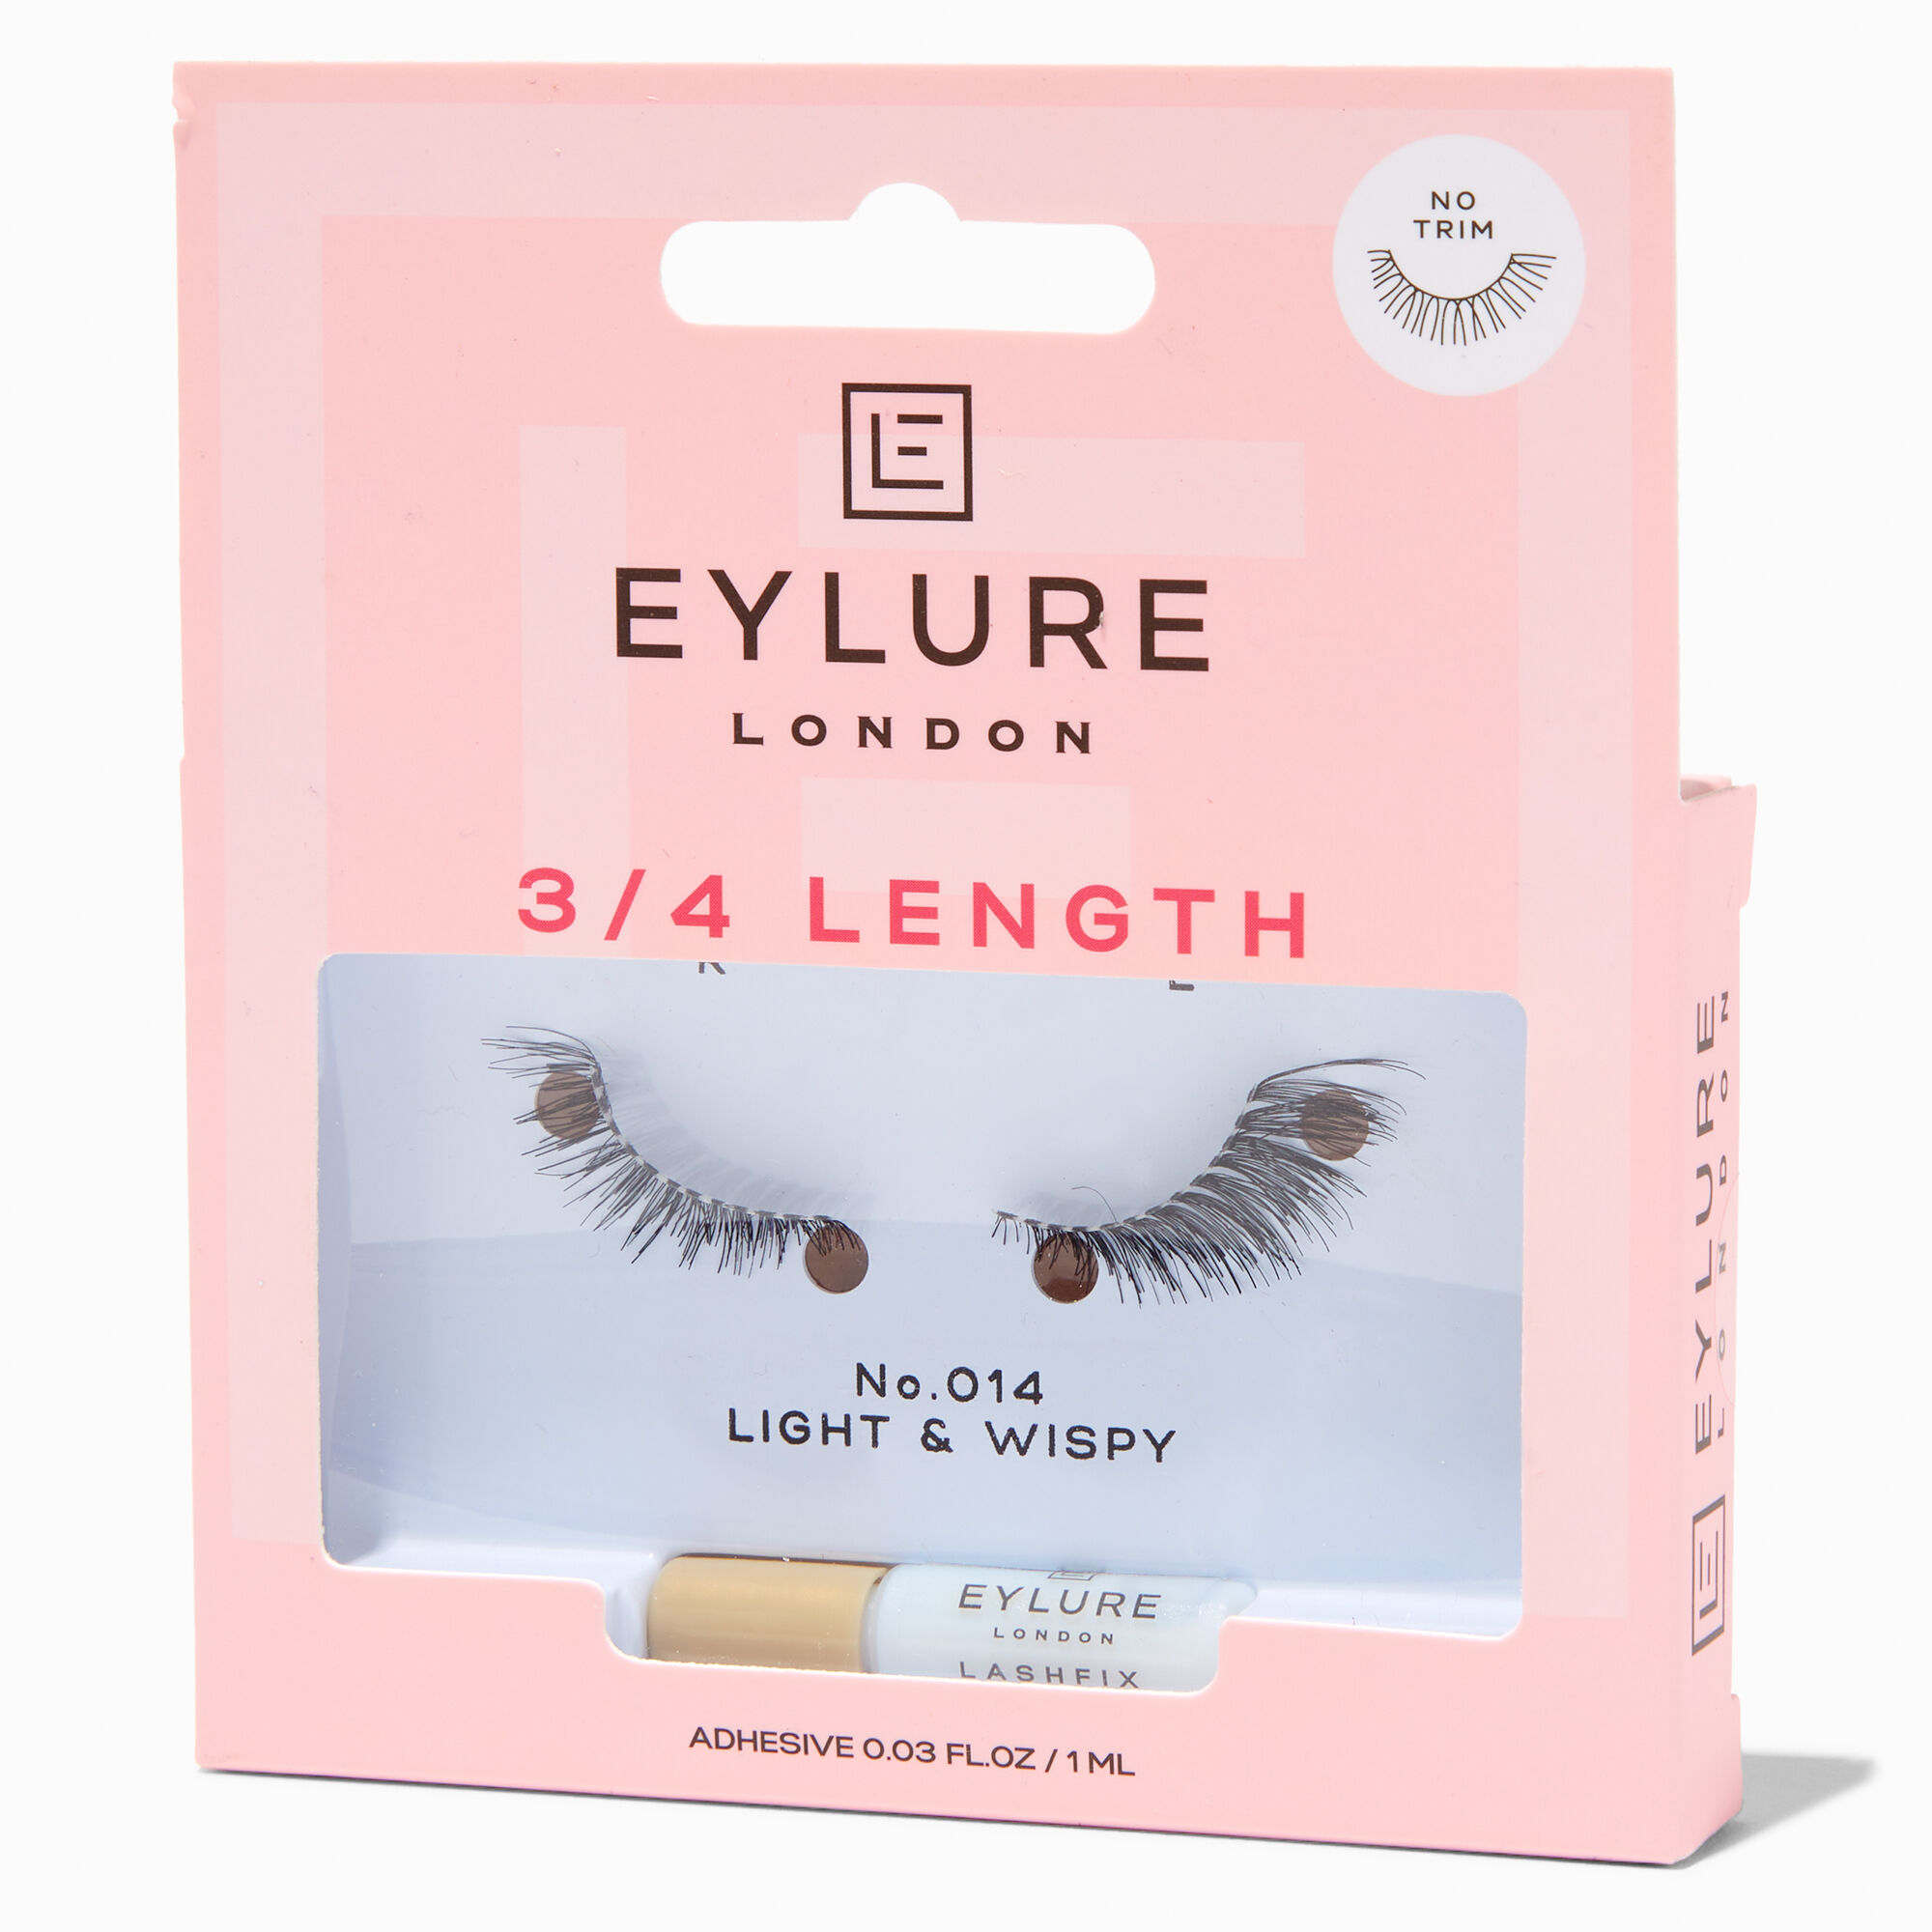 View Claires Eylure 34 Length False Lashes No 015 Light Wispy information